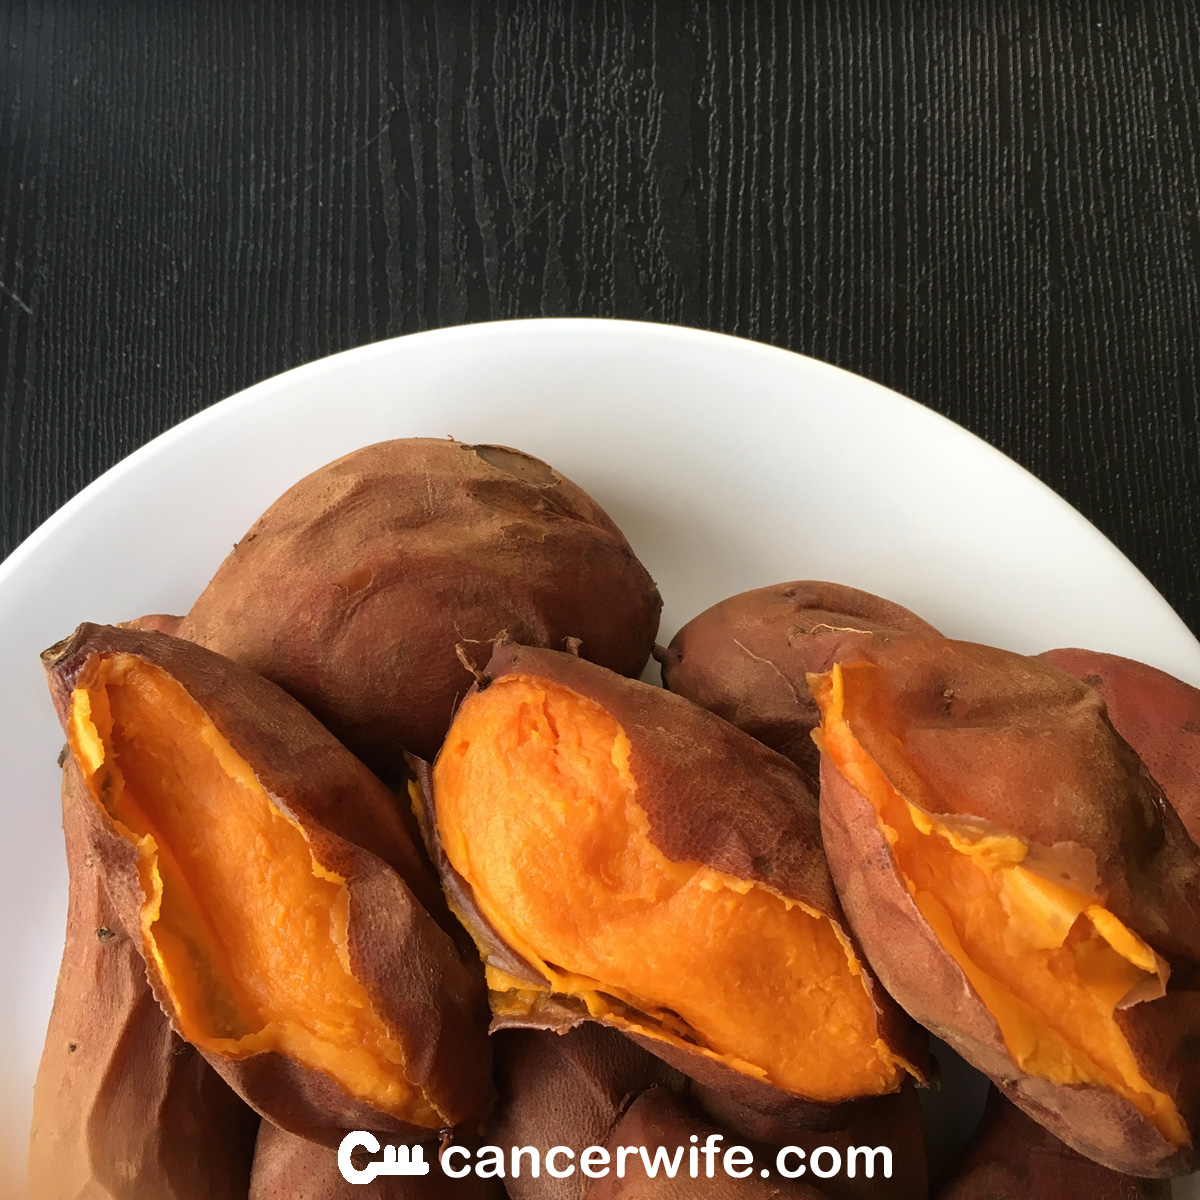 Instant Pot steamed sweet potatoes recipe, yam recipe, healthy and easy recipe